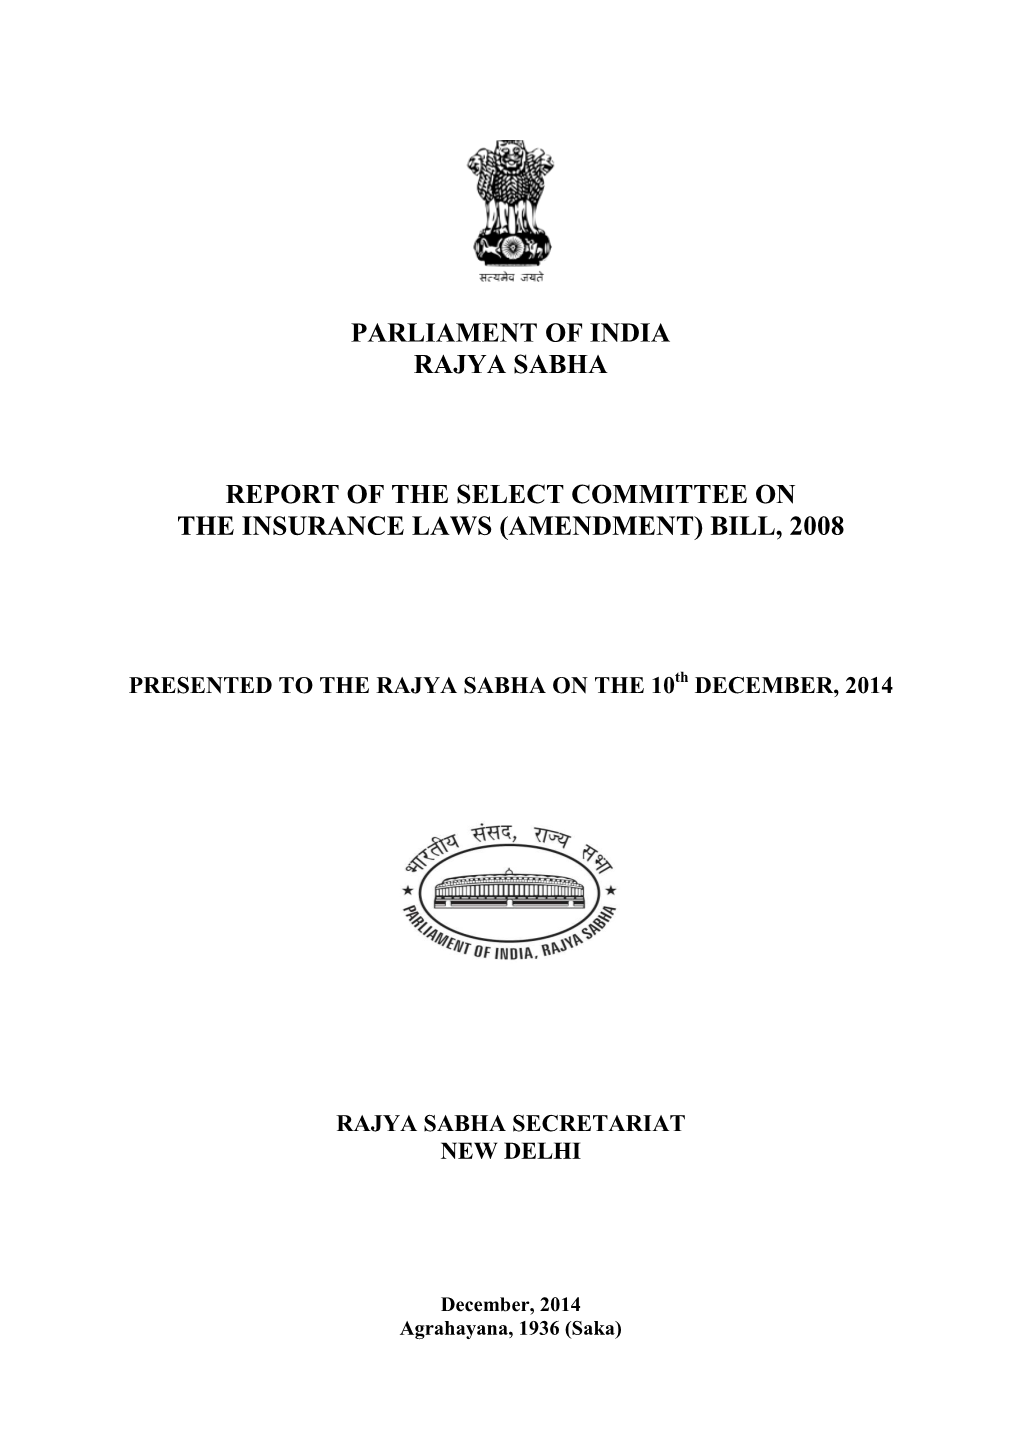 Report on the Insurance Laws (Amendment) Bill, 2008, Which Had Already Been Circulated to the Members